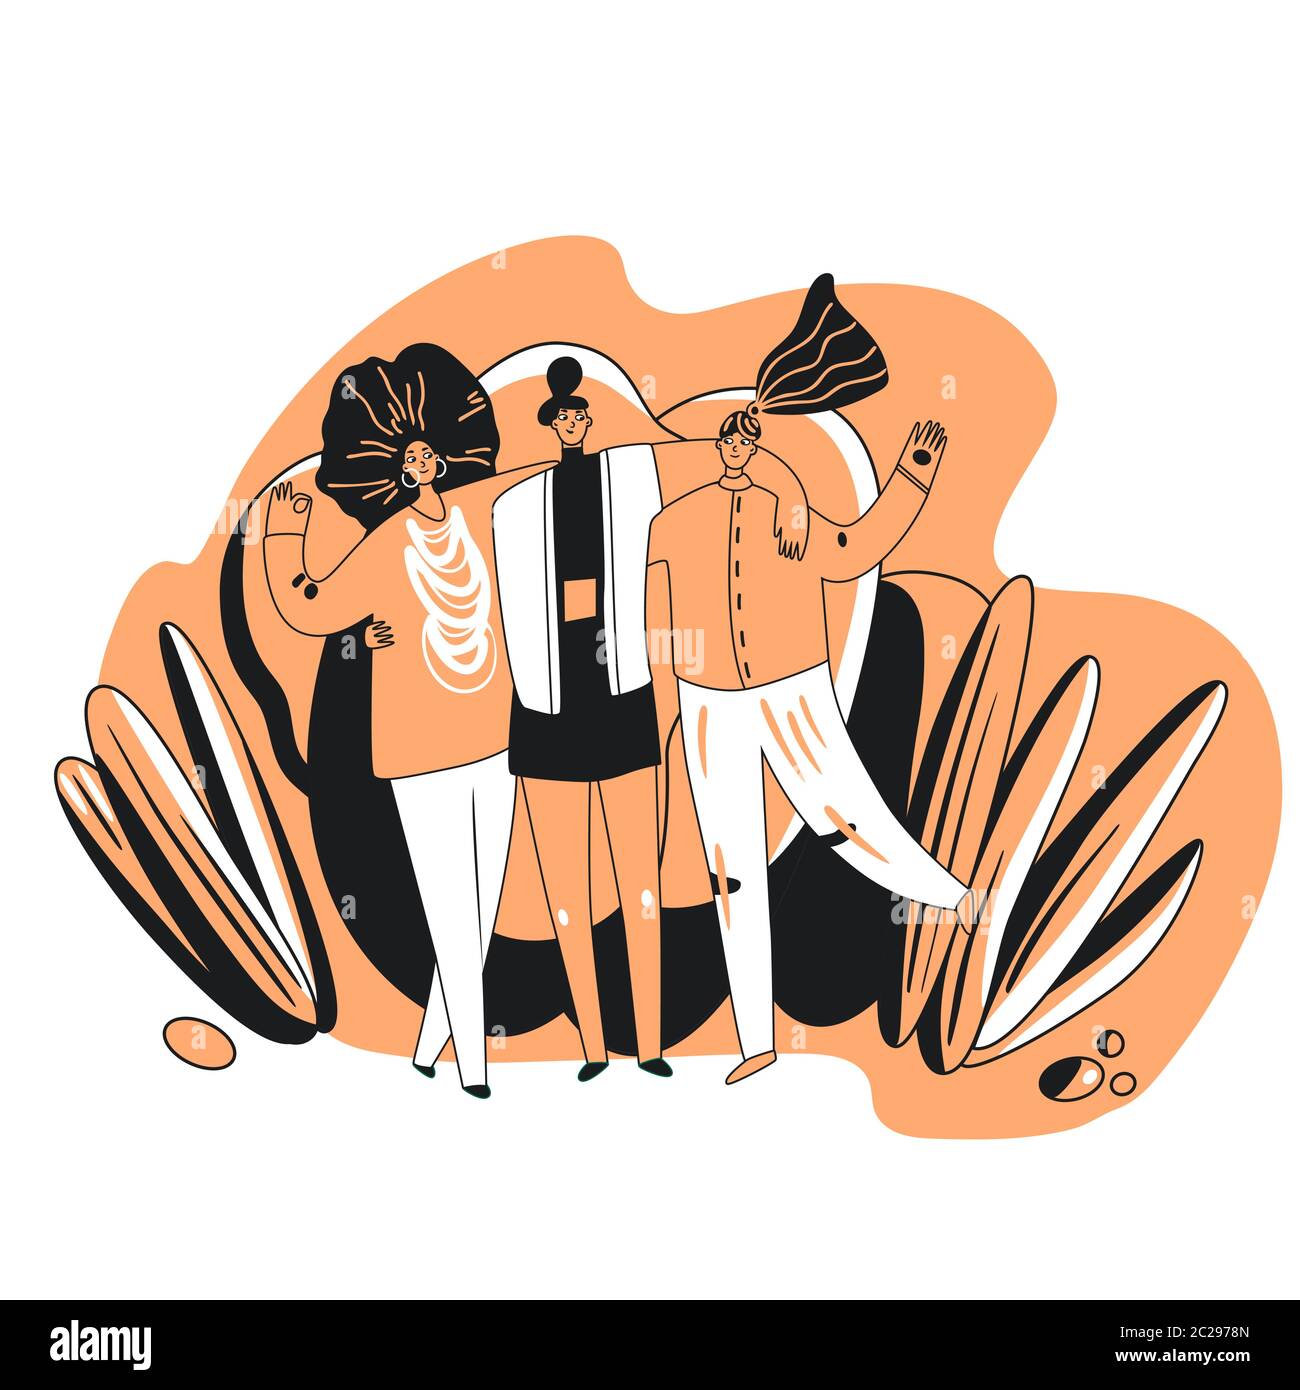 Happy friends and sisterhood vector cartoon illustration. Happy woman holding hands, hugging each other in friendly and positive mood. Sisterhood Stock Vector